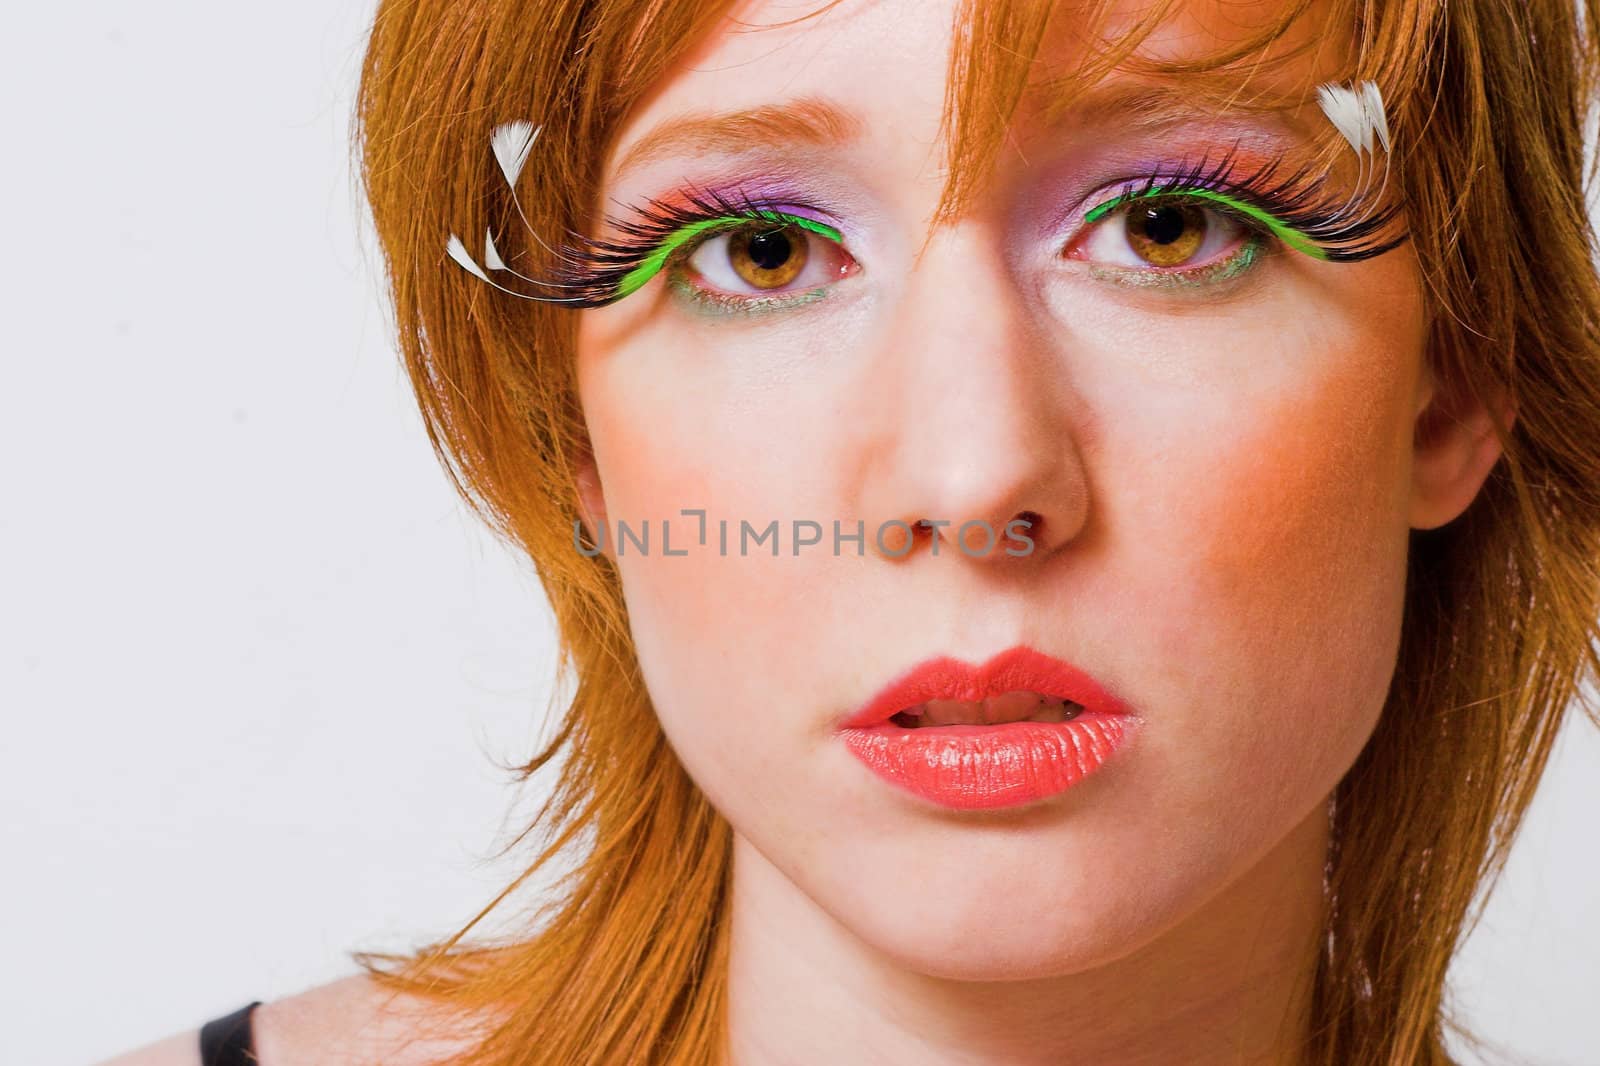 Portrait of a red haired girl with extreme make-up